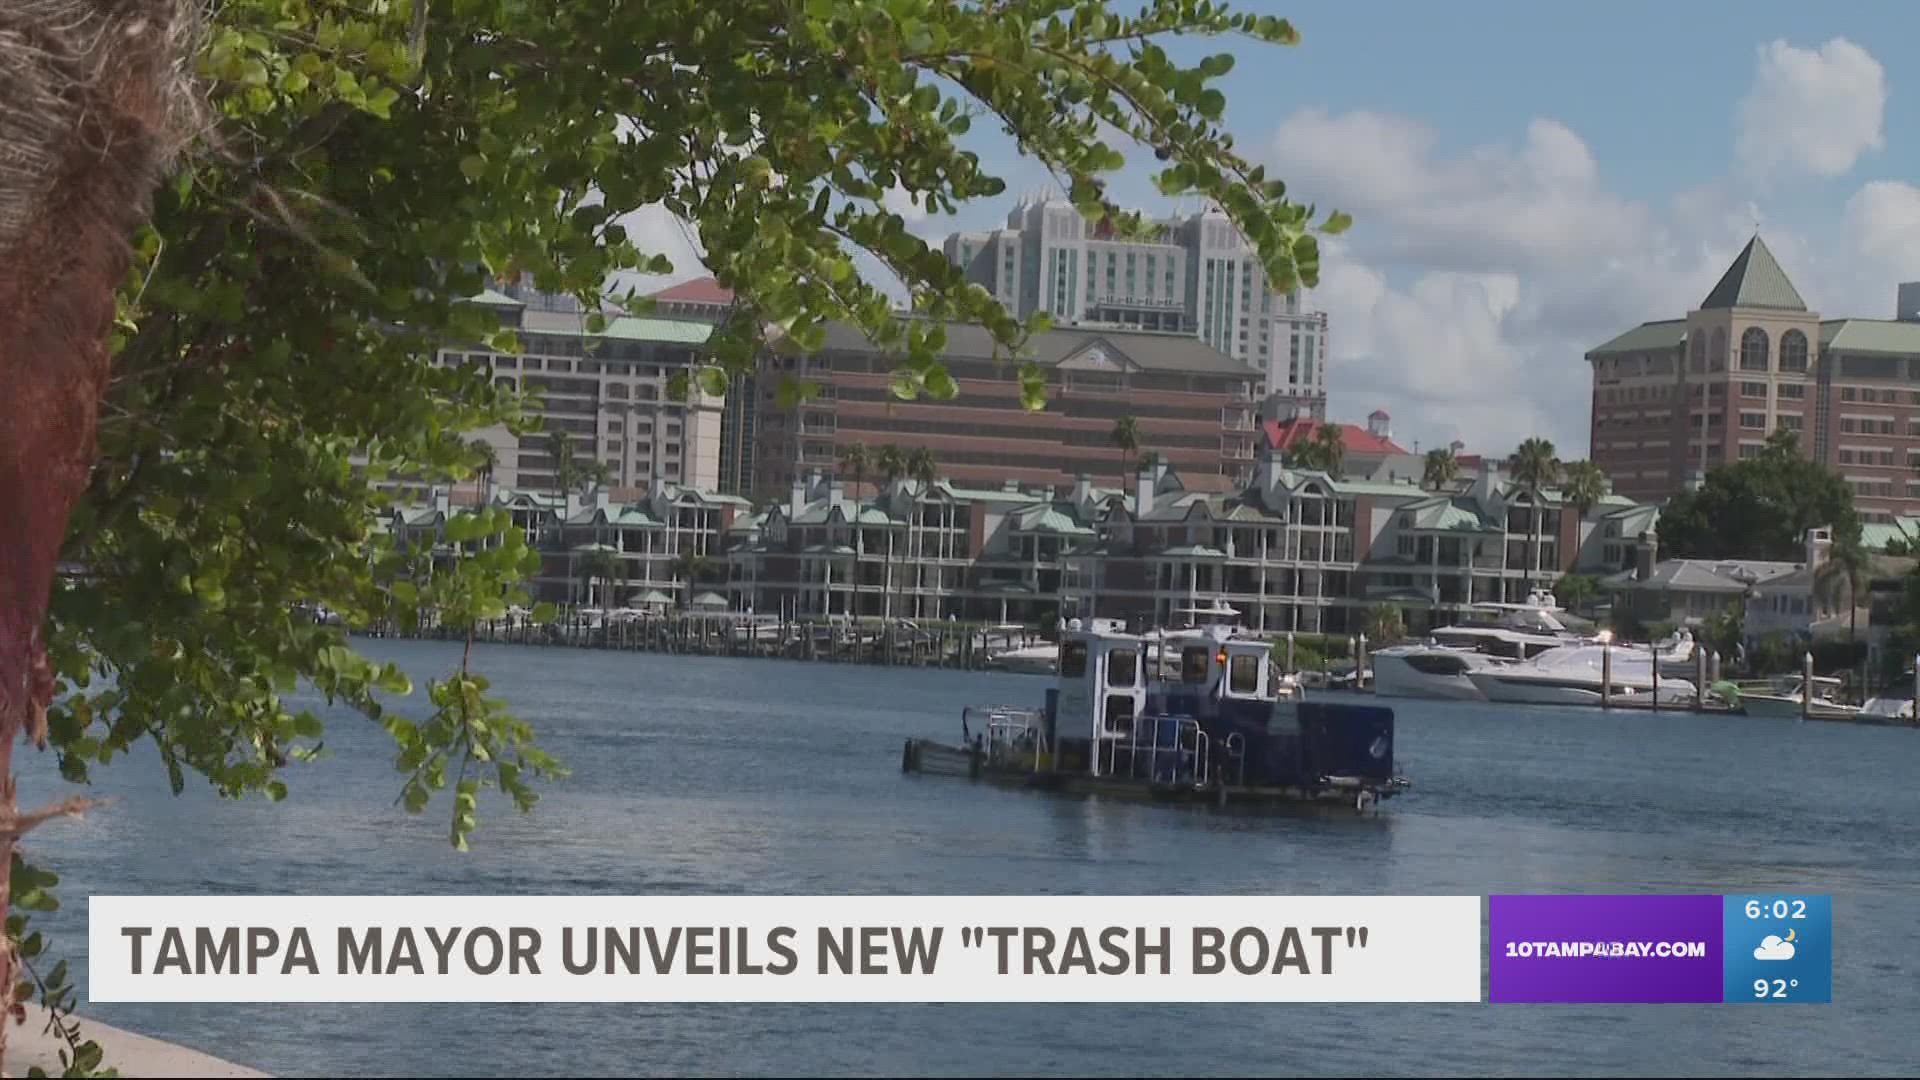 The new trash boat is part of the launch of an initiative called "Keep it Clean, Tampa."